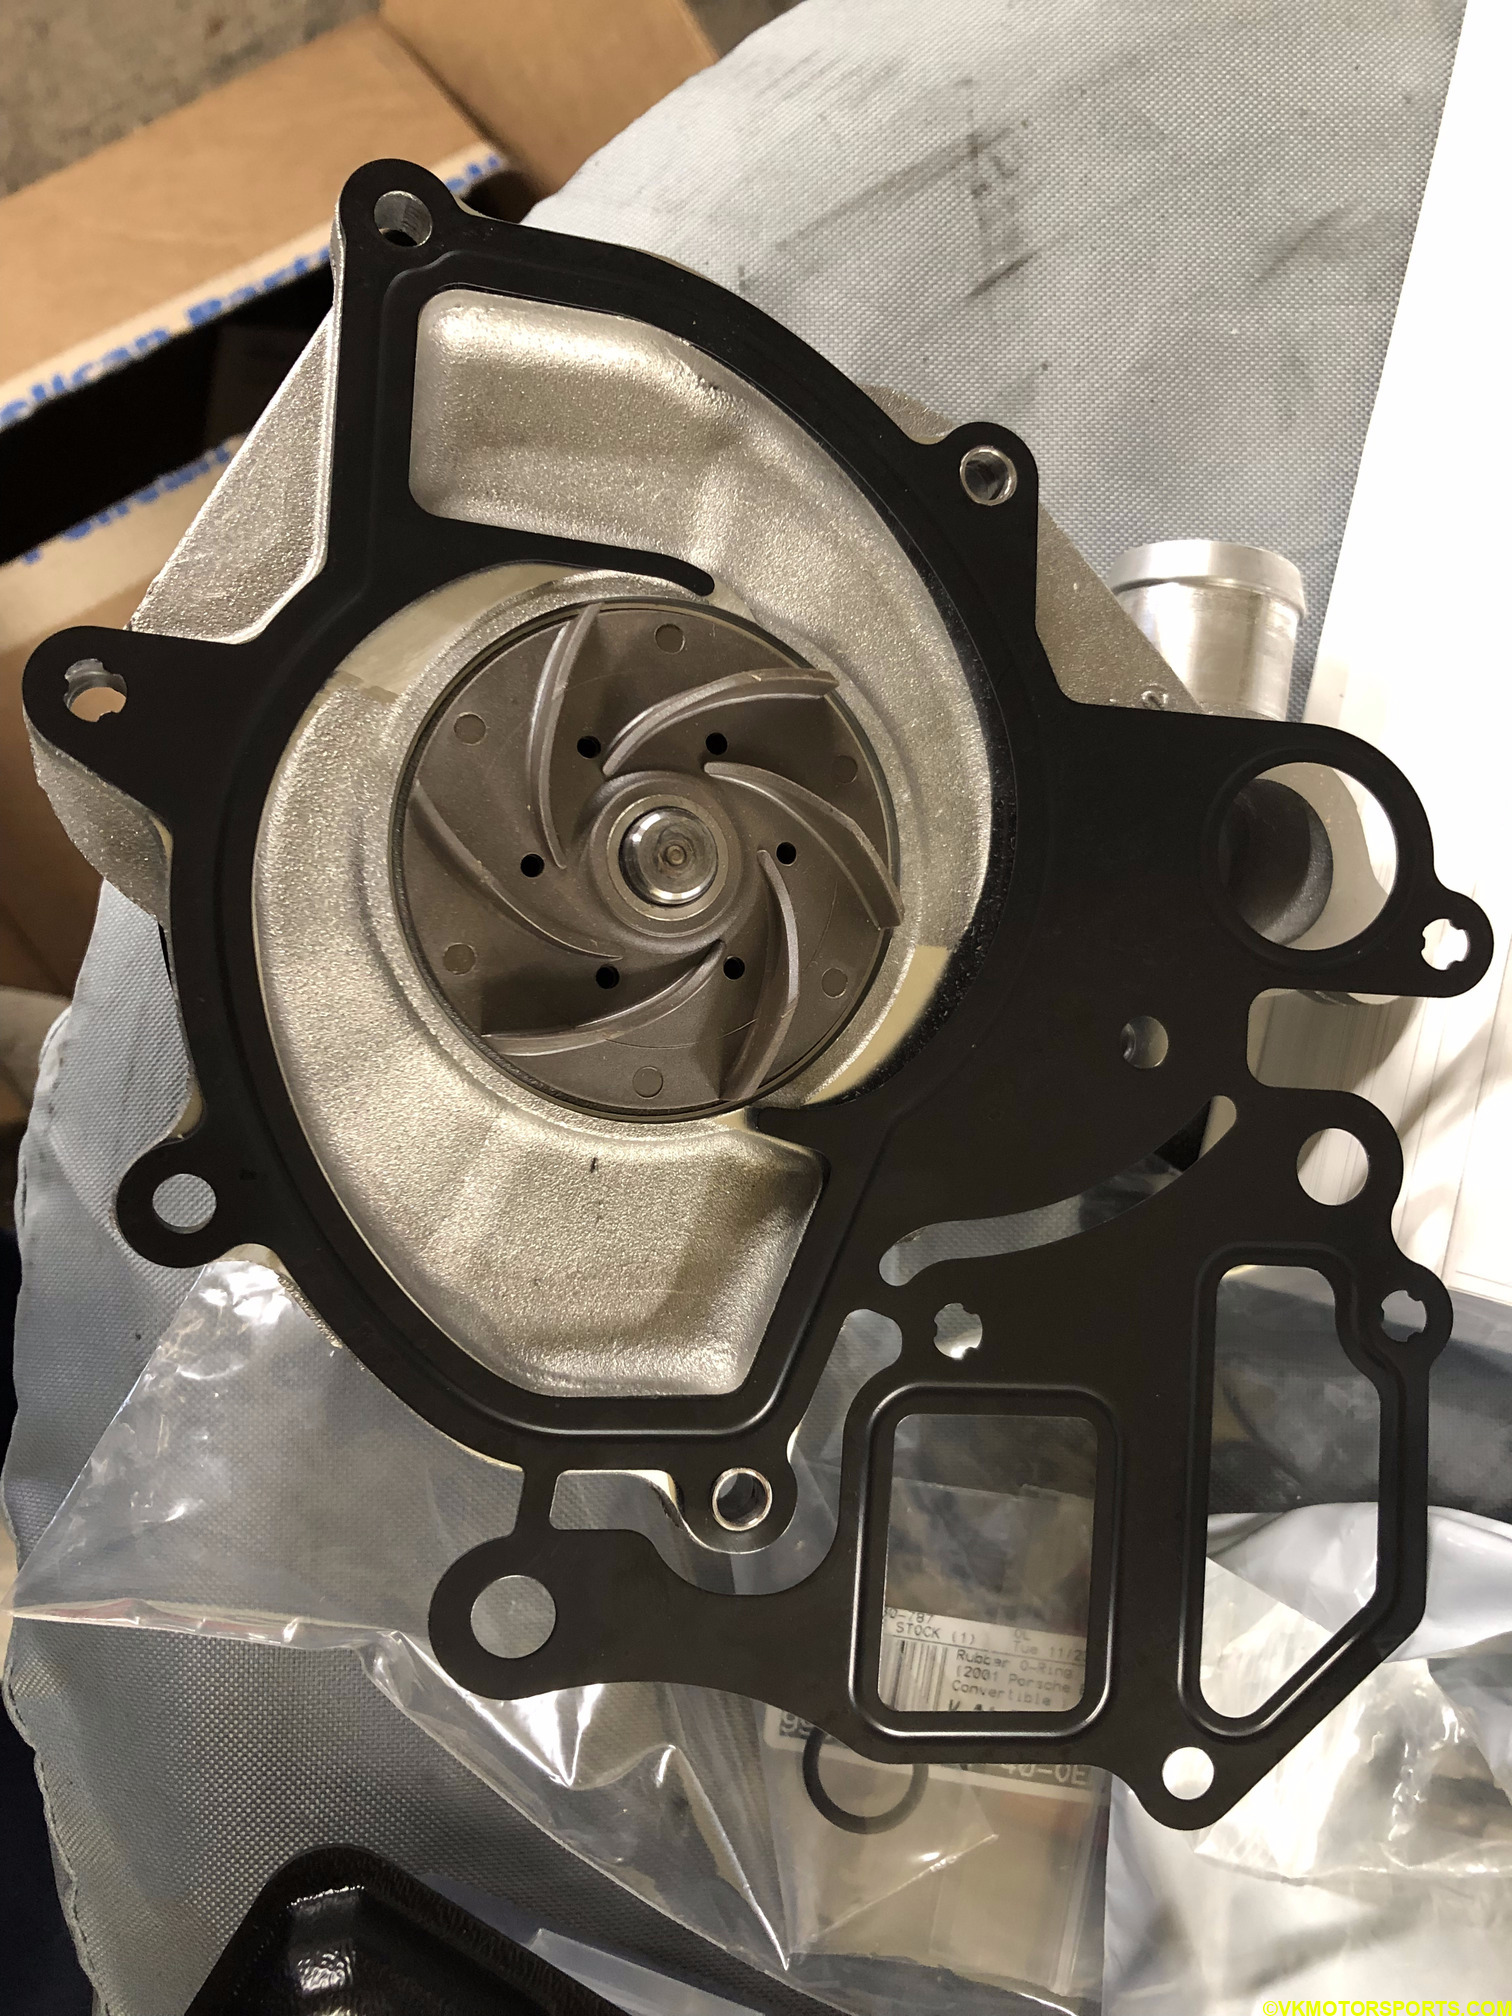 Figure 24a. New gasket attached to the new water pump